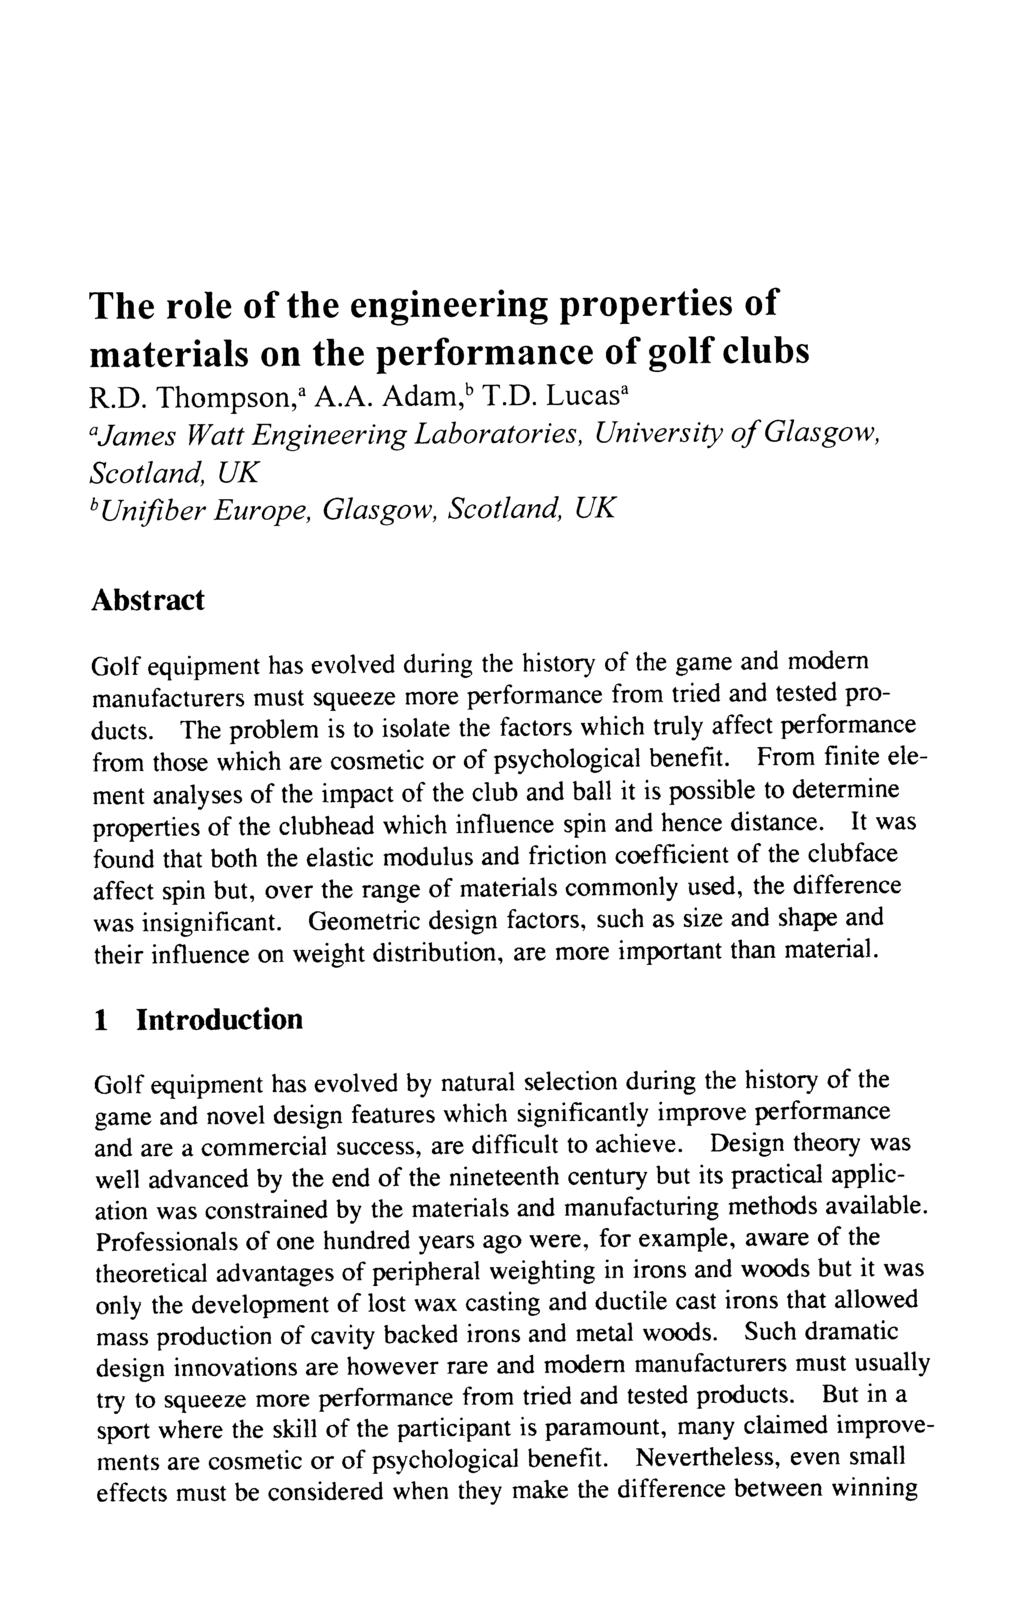 The role of the engineering properties of materials on the performance of golf clubs R.D.